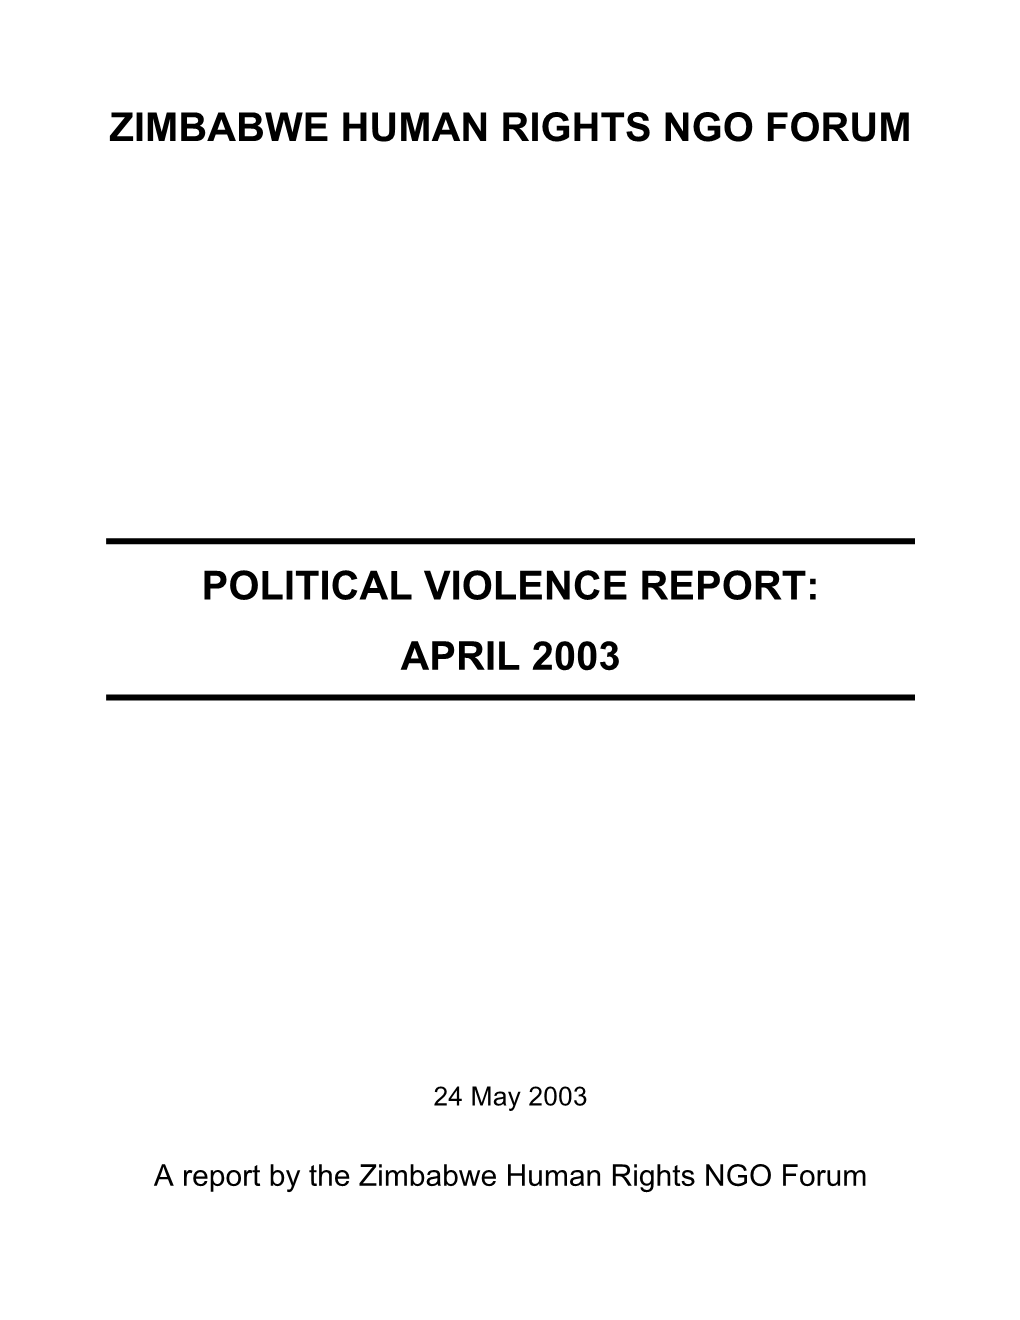 Zimbabwe Human Rights NGO Forum Political Violence Report: April 2003 OVERVIEW